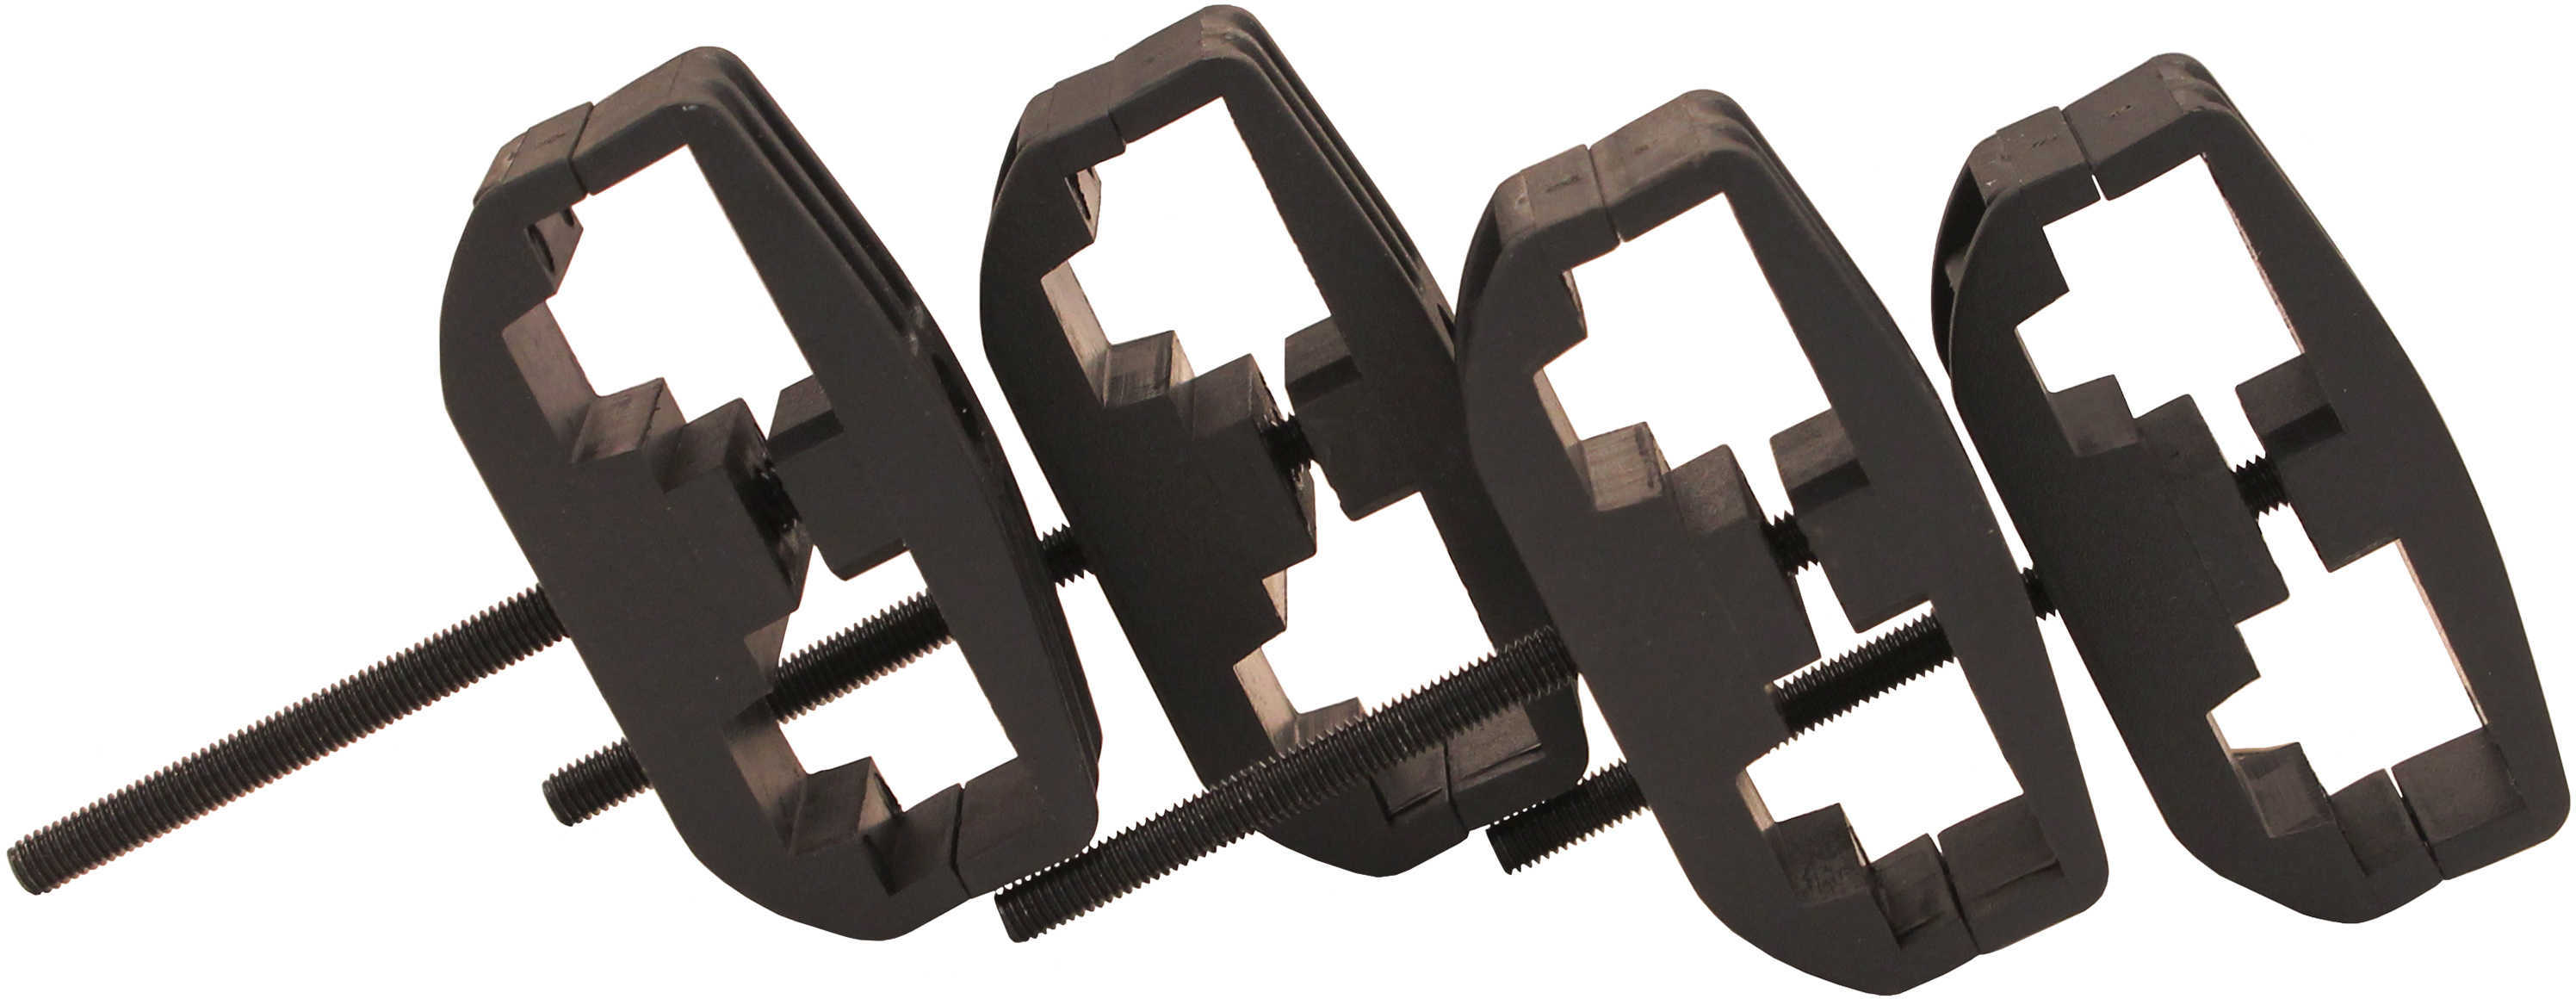 Promag AR-15 Polymer Steel & Aluminum Magazine Clamps 4 Pack - Hold Two Magazines Side By